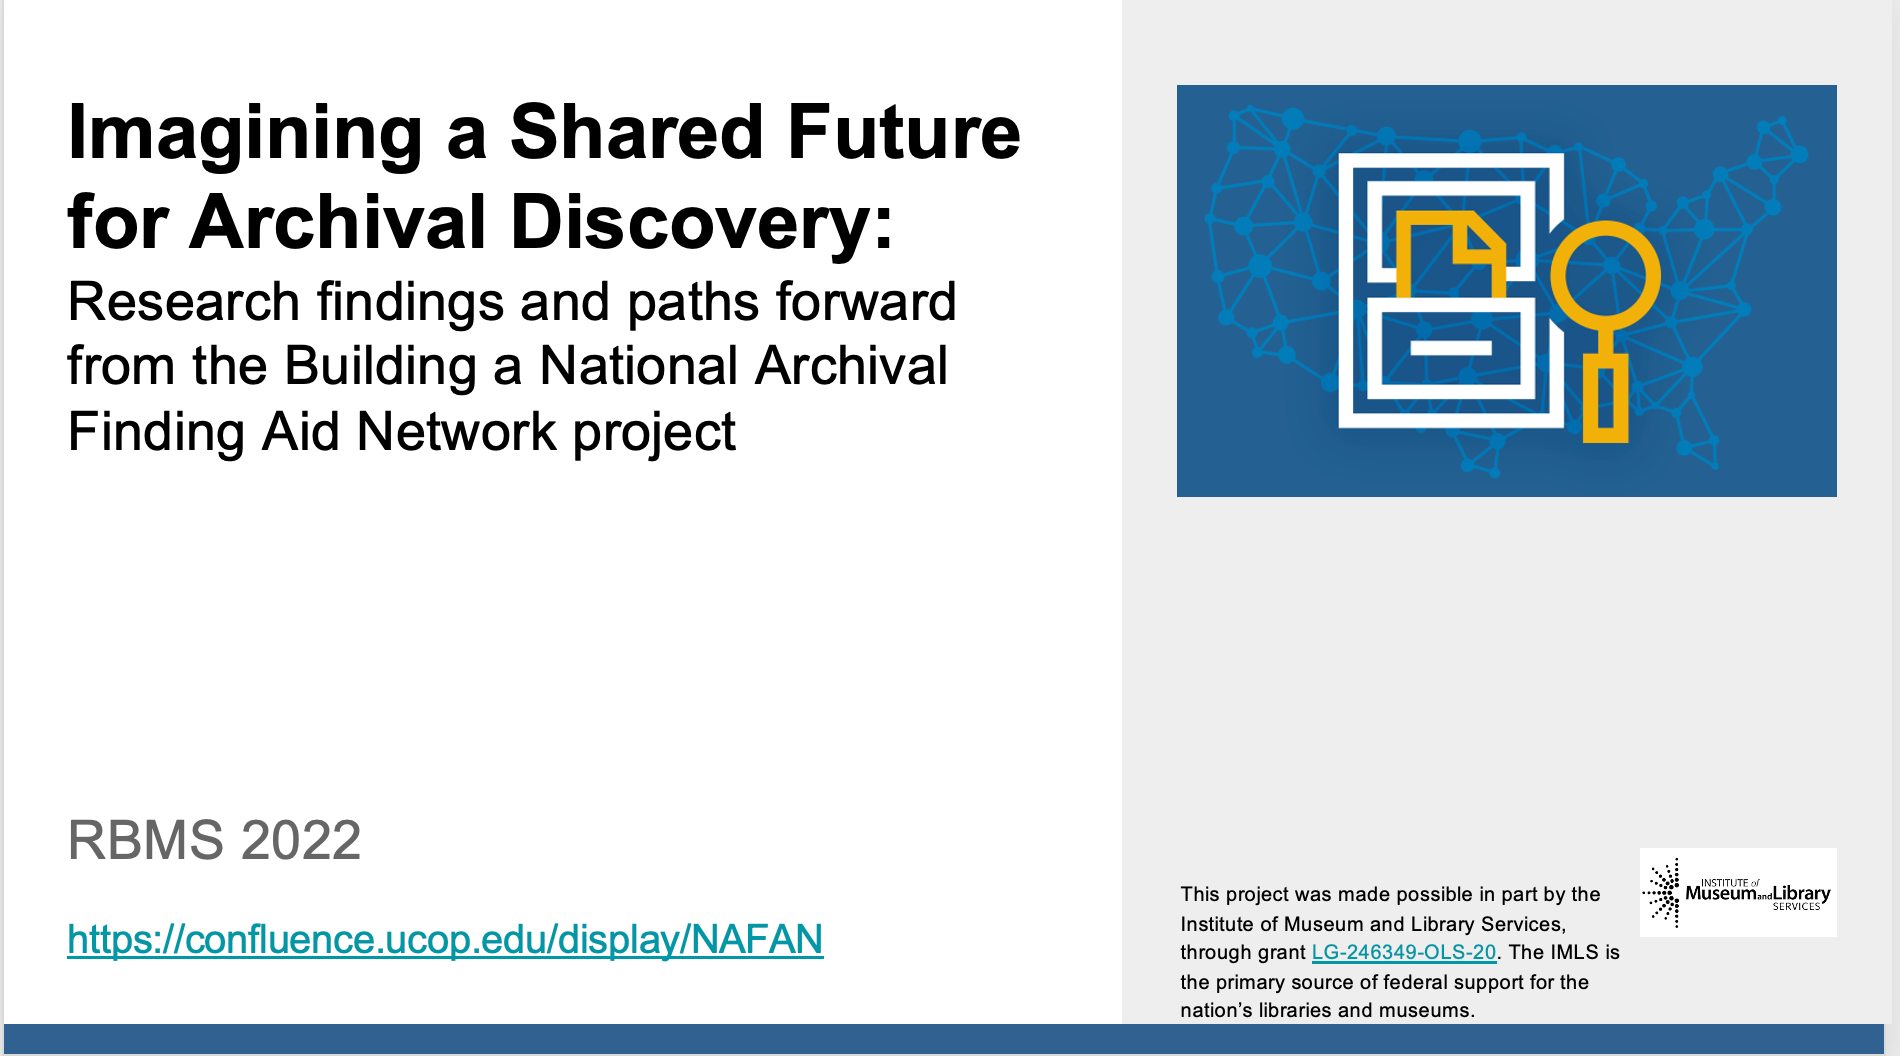 Imagining a Shared Future for Archival Discovery